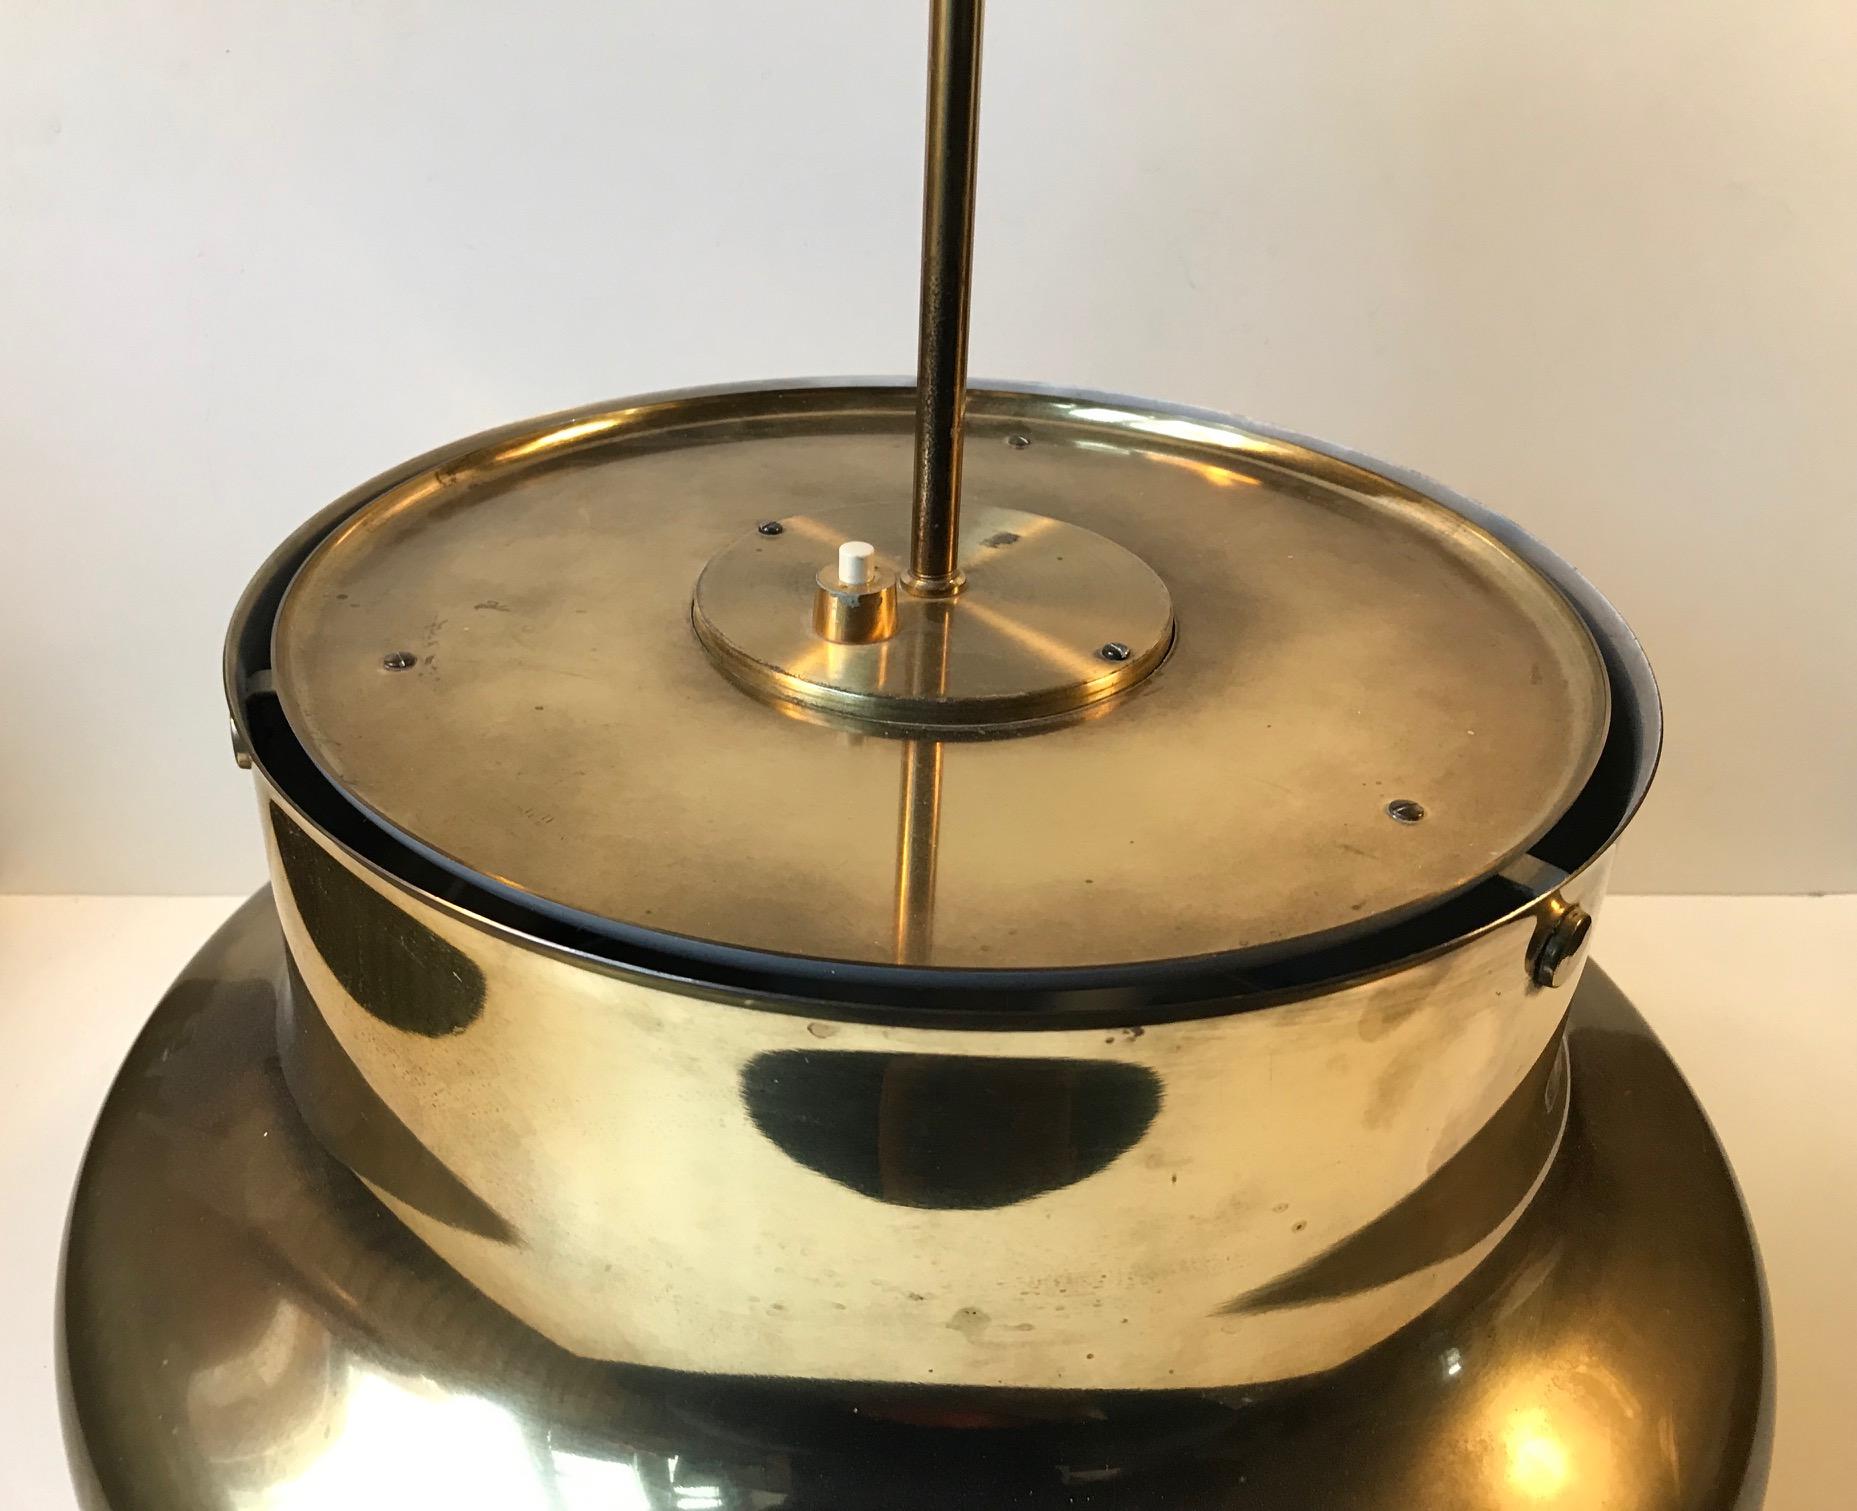 This is a large version of the 'Bumling' ceiling lamp designed by Anders Pehrson in 1968. It was manufactured by Atelje Lyktan in Åhus, Sweden, 1970s. It is made of solid brass that has developed a rainbow-like patina over the years. This lamp